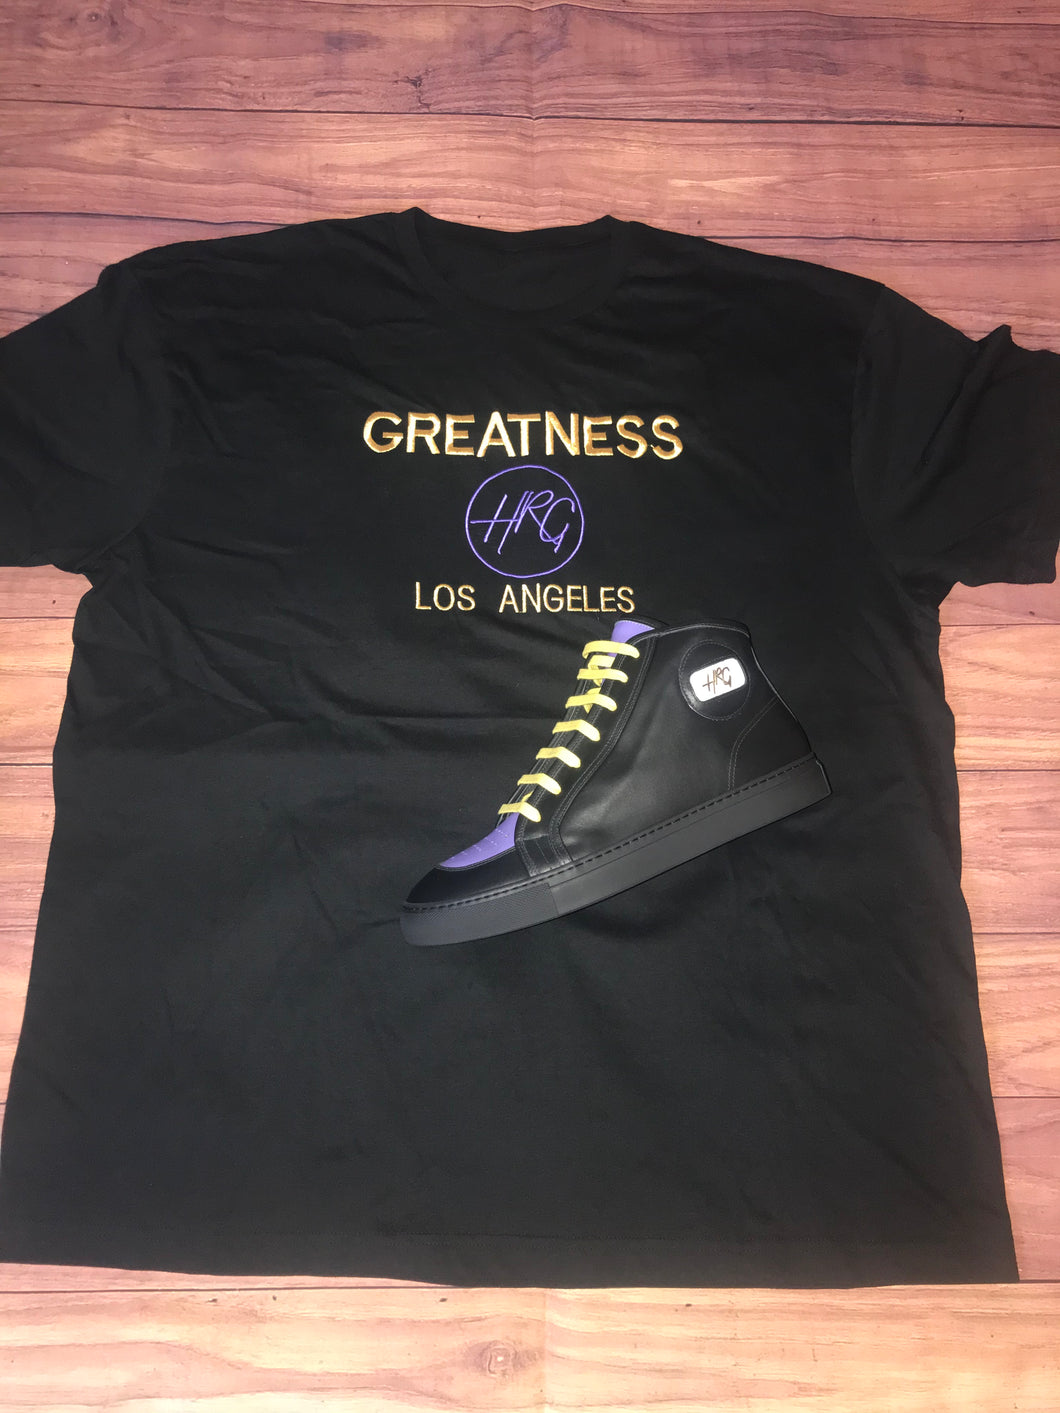 Los Angeles Black Mamba We Are The World Greatness Tee - HRG Collection